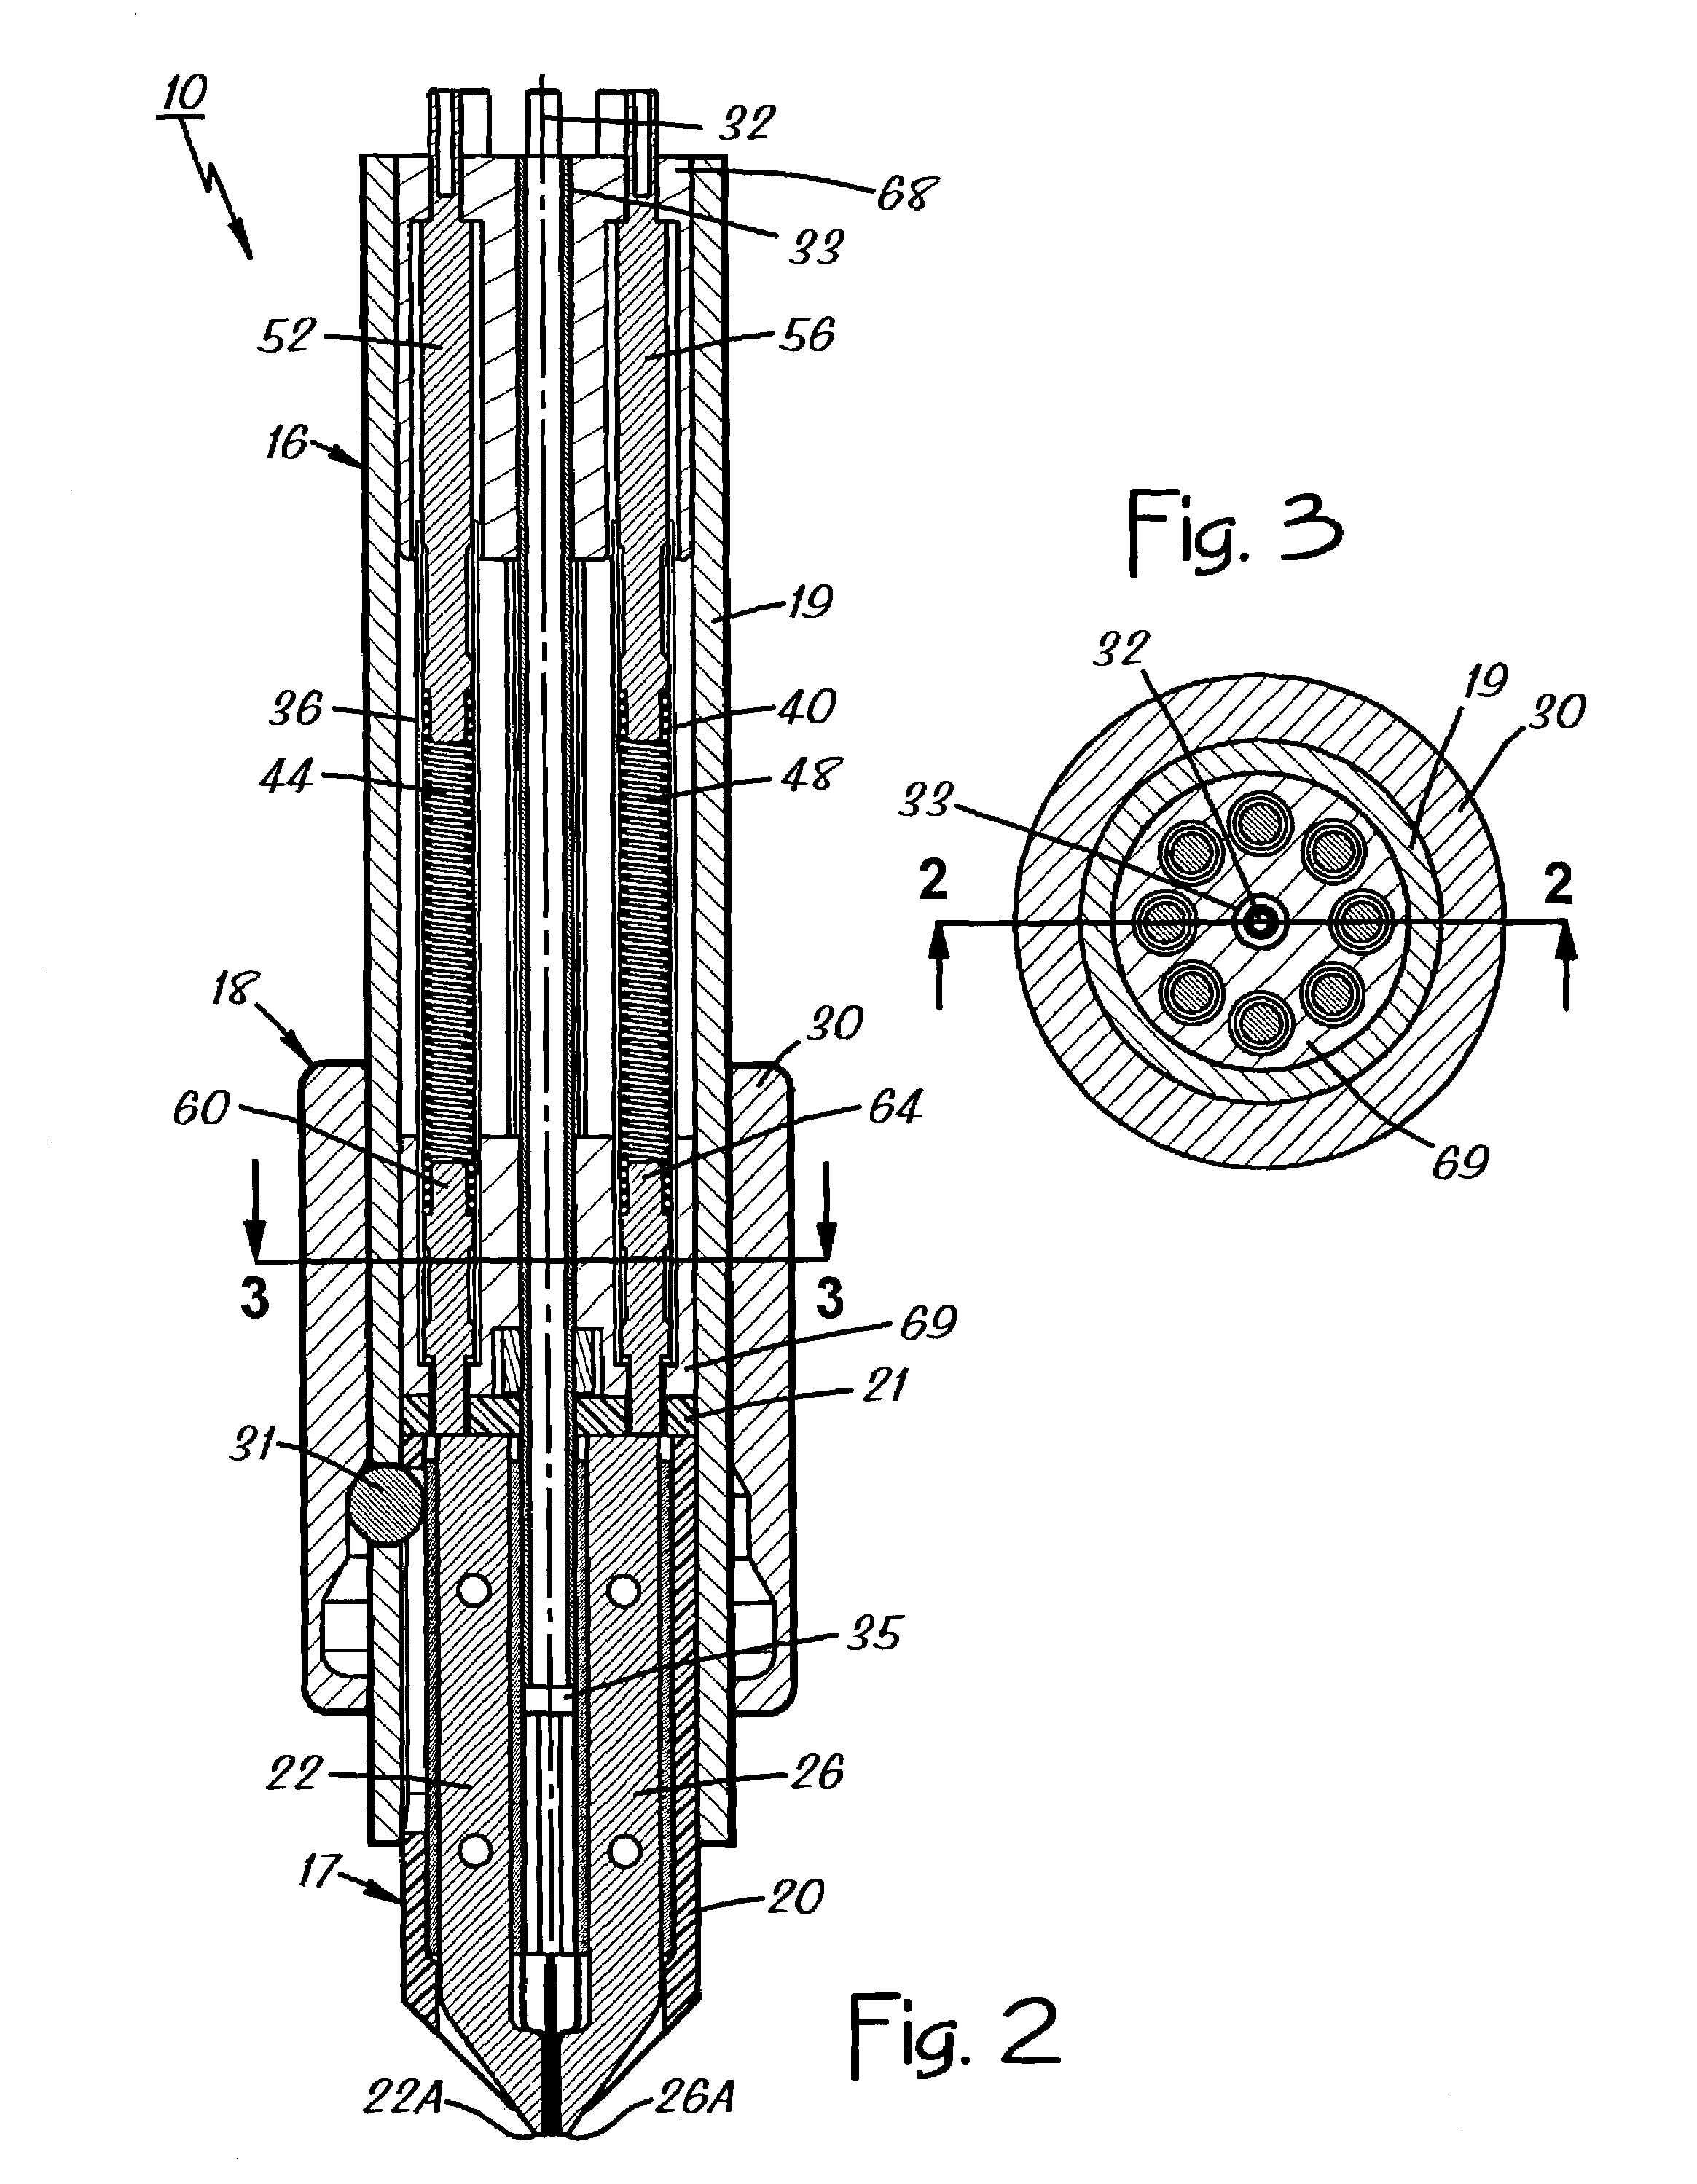 Pogo contactor assembly for testing of and/or other operations on ceramic surface mount devices and other electronic components